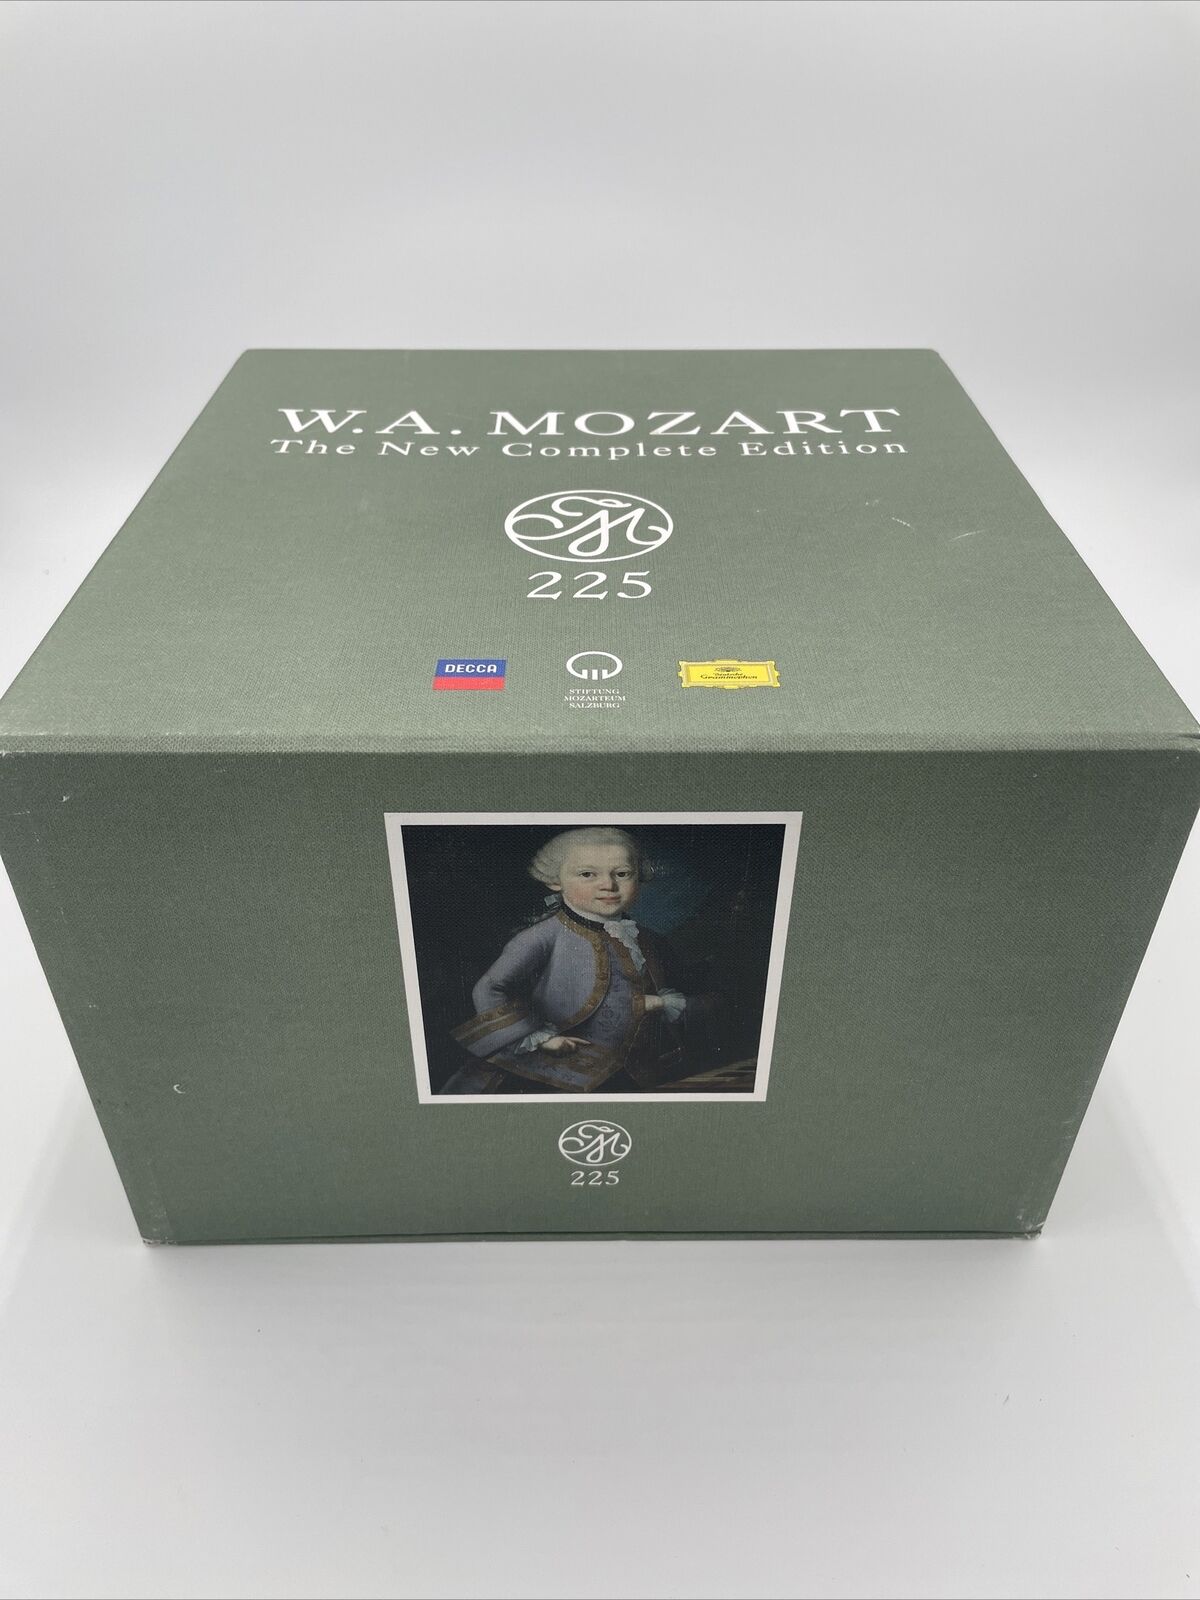 Mozart 225: The New Complete Edition, Decca & DG, 200 CD Limited Edition, 2016